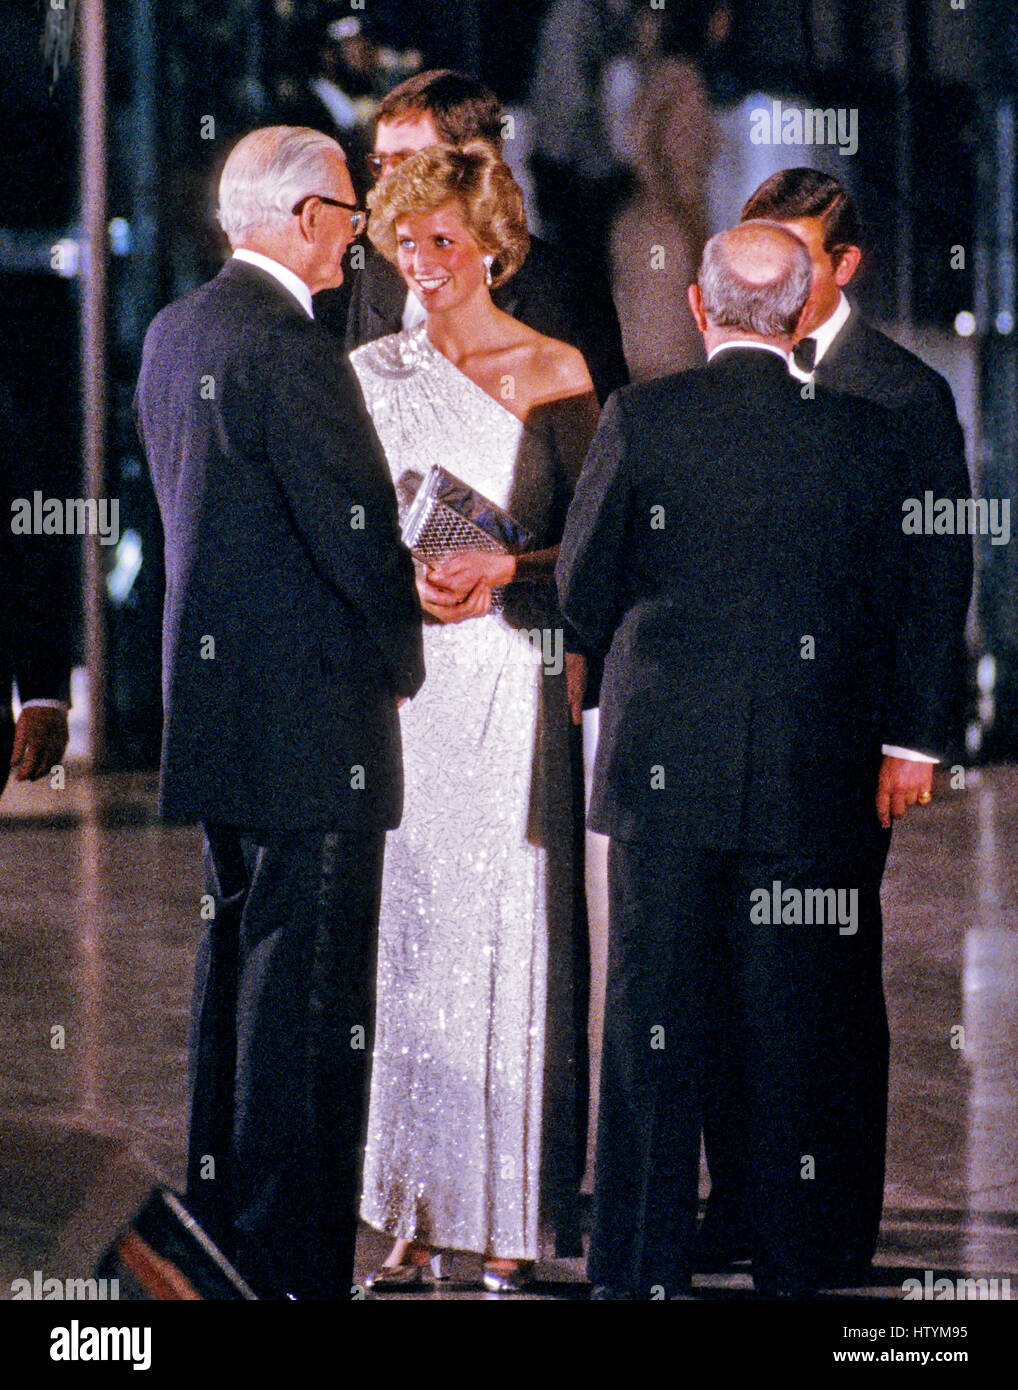 Princess Diana departs the National Gallery of Art in Washington, DC following an evening dinner and reception accompanied by Dr Franklin Murphy, Board Chairman of the National Gallery of Art, and John Stevenson, President of the National Gallery of Art, Stock Photo